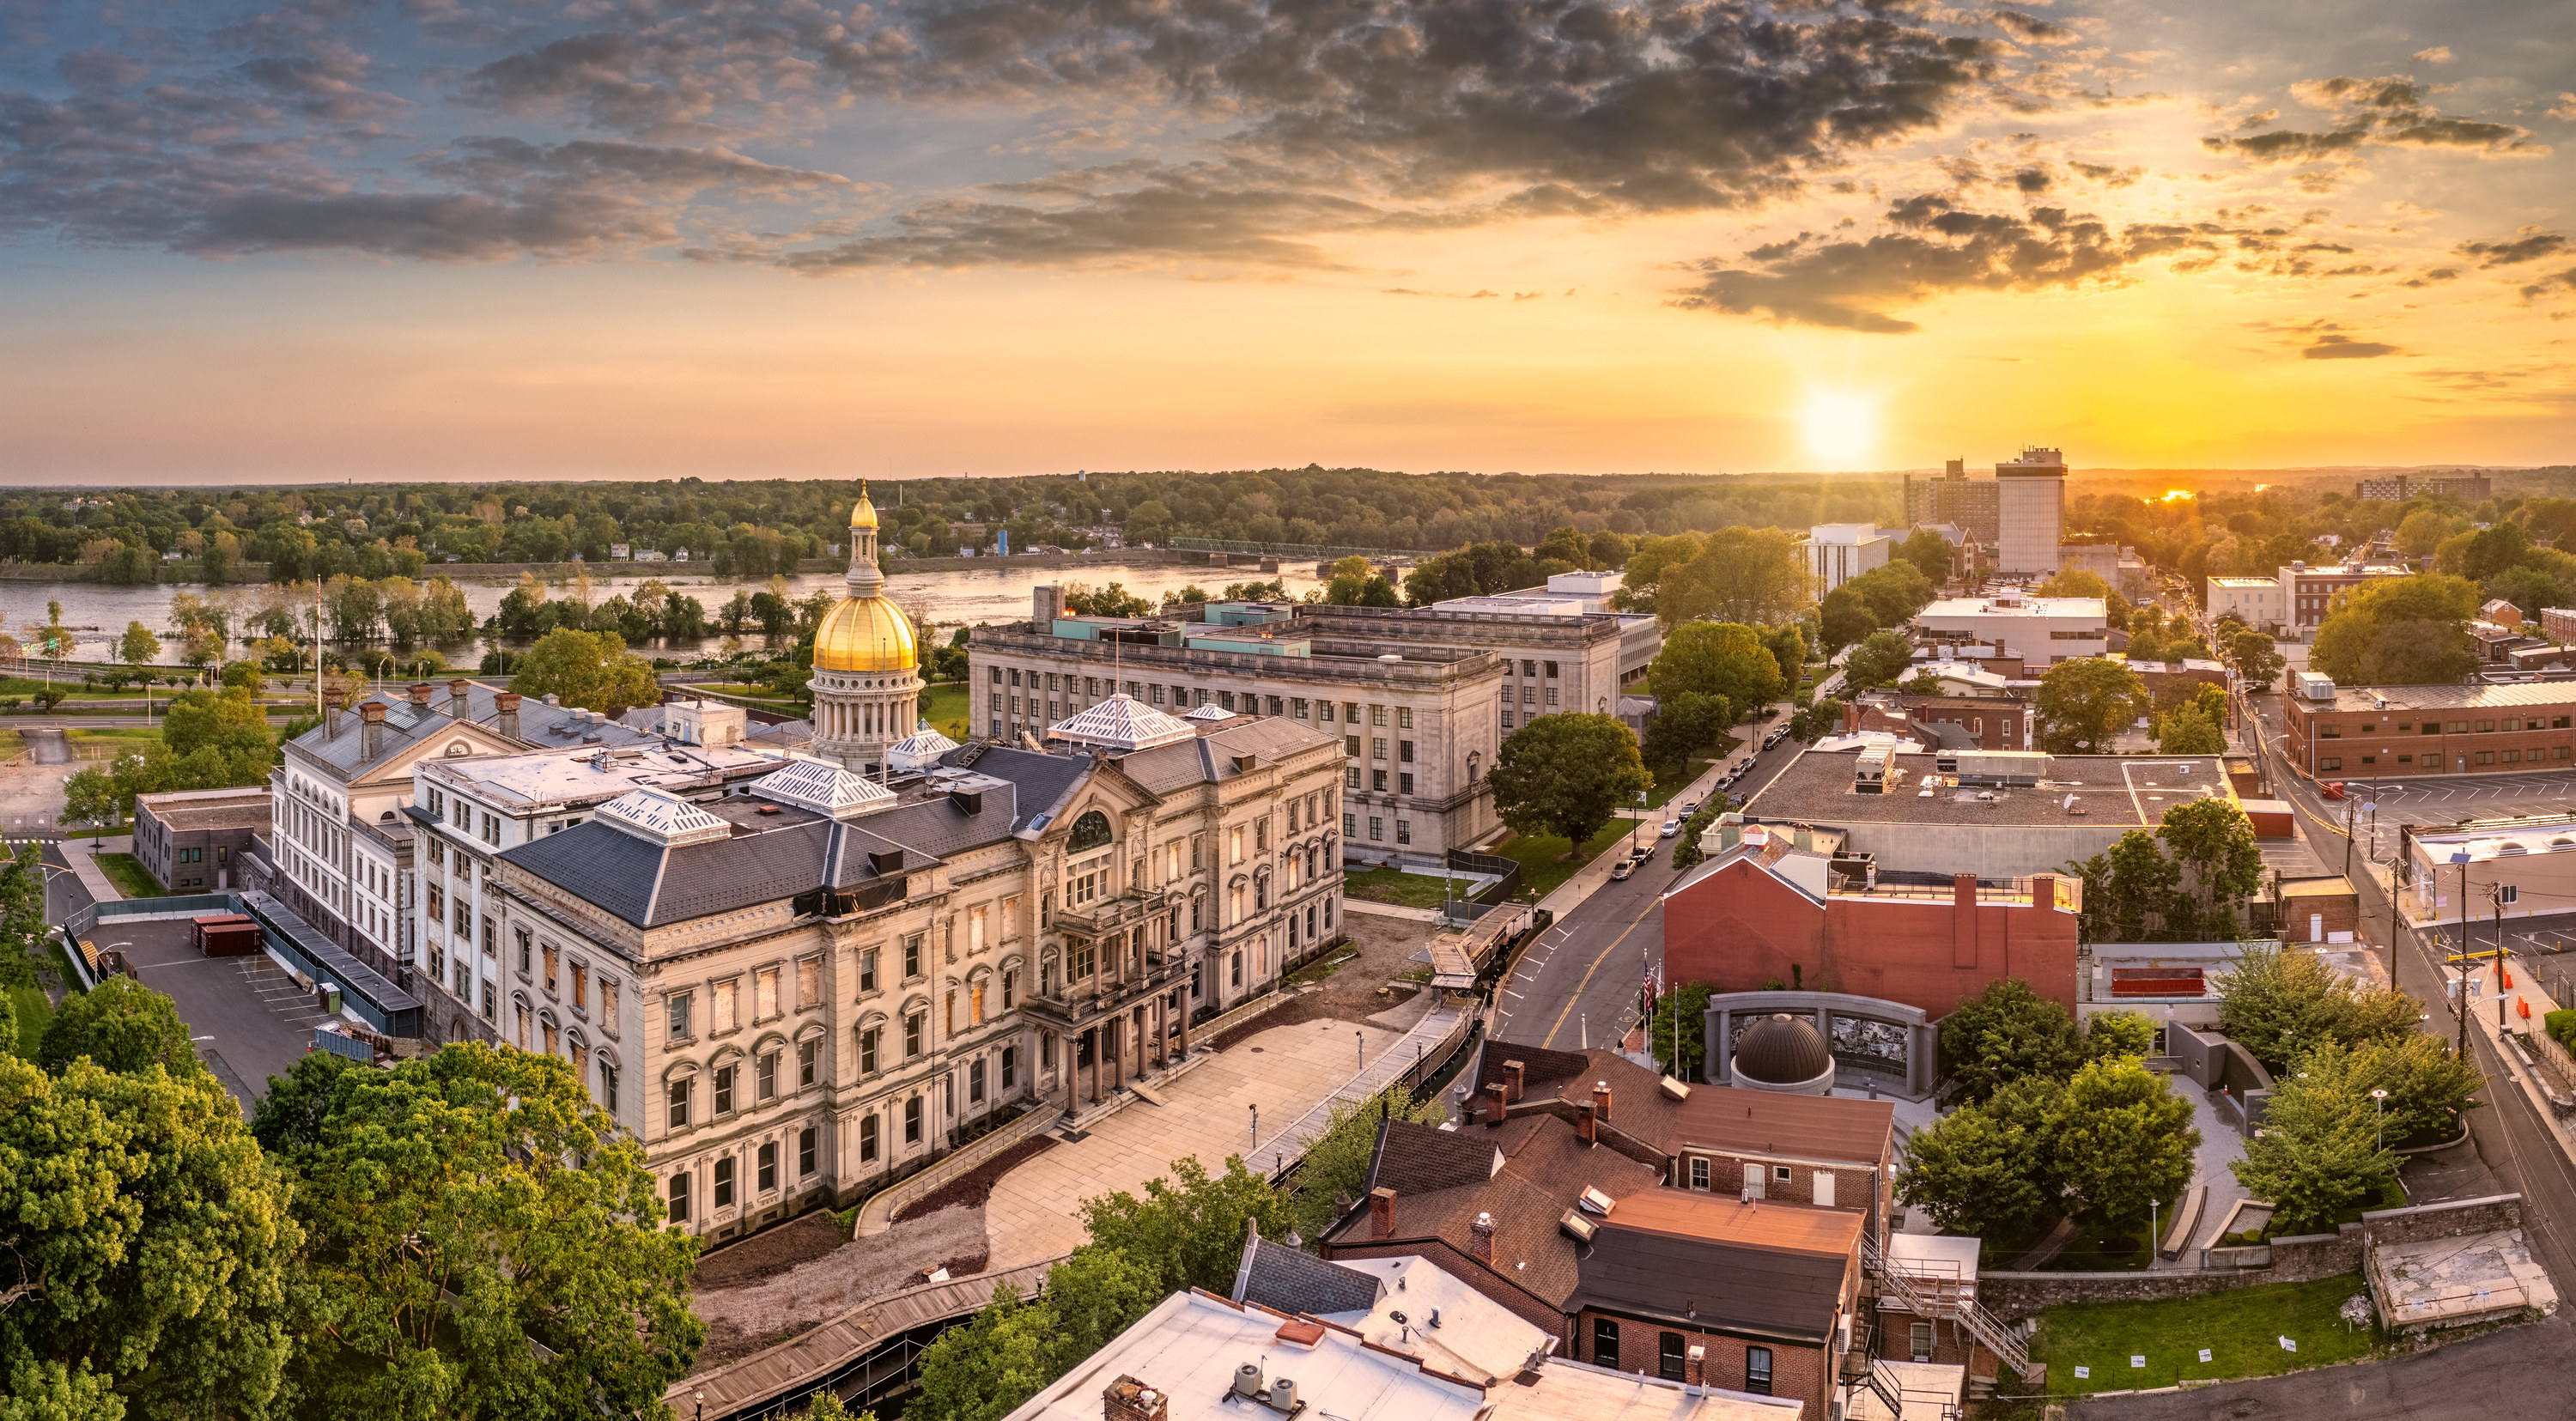 An aerial shot of Trenton, NJ at sunset with the capital building in full view